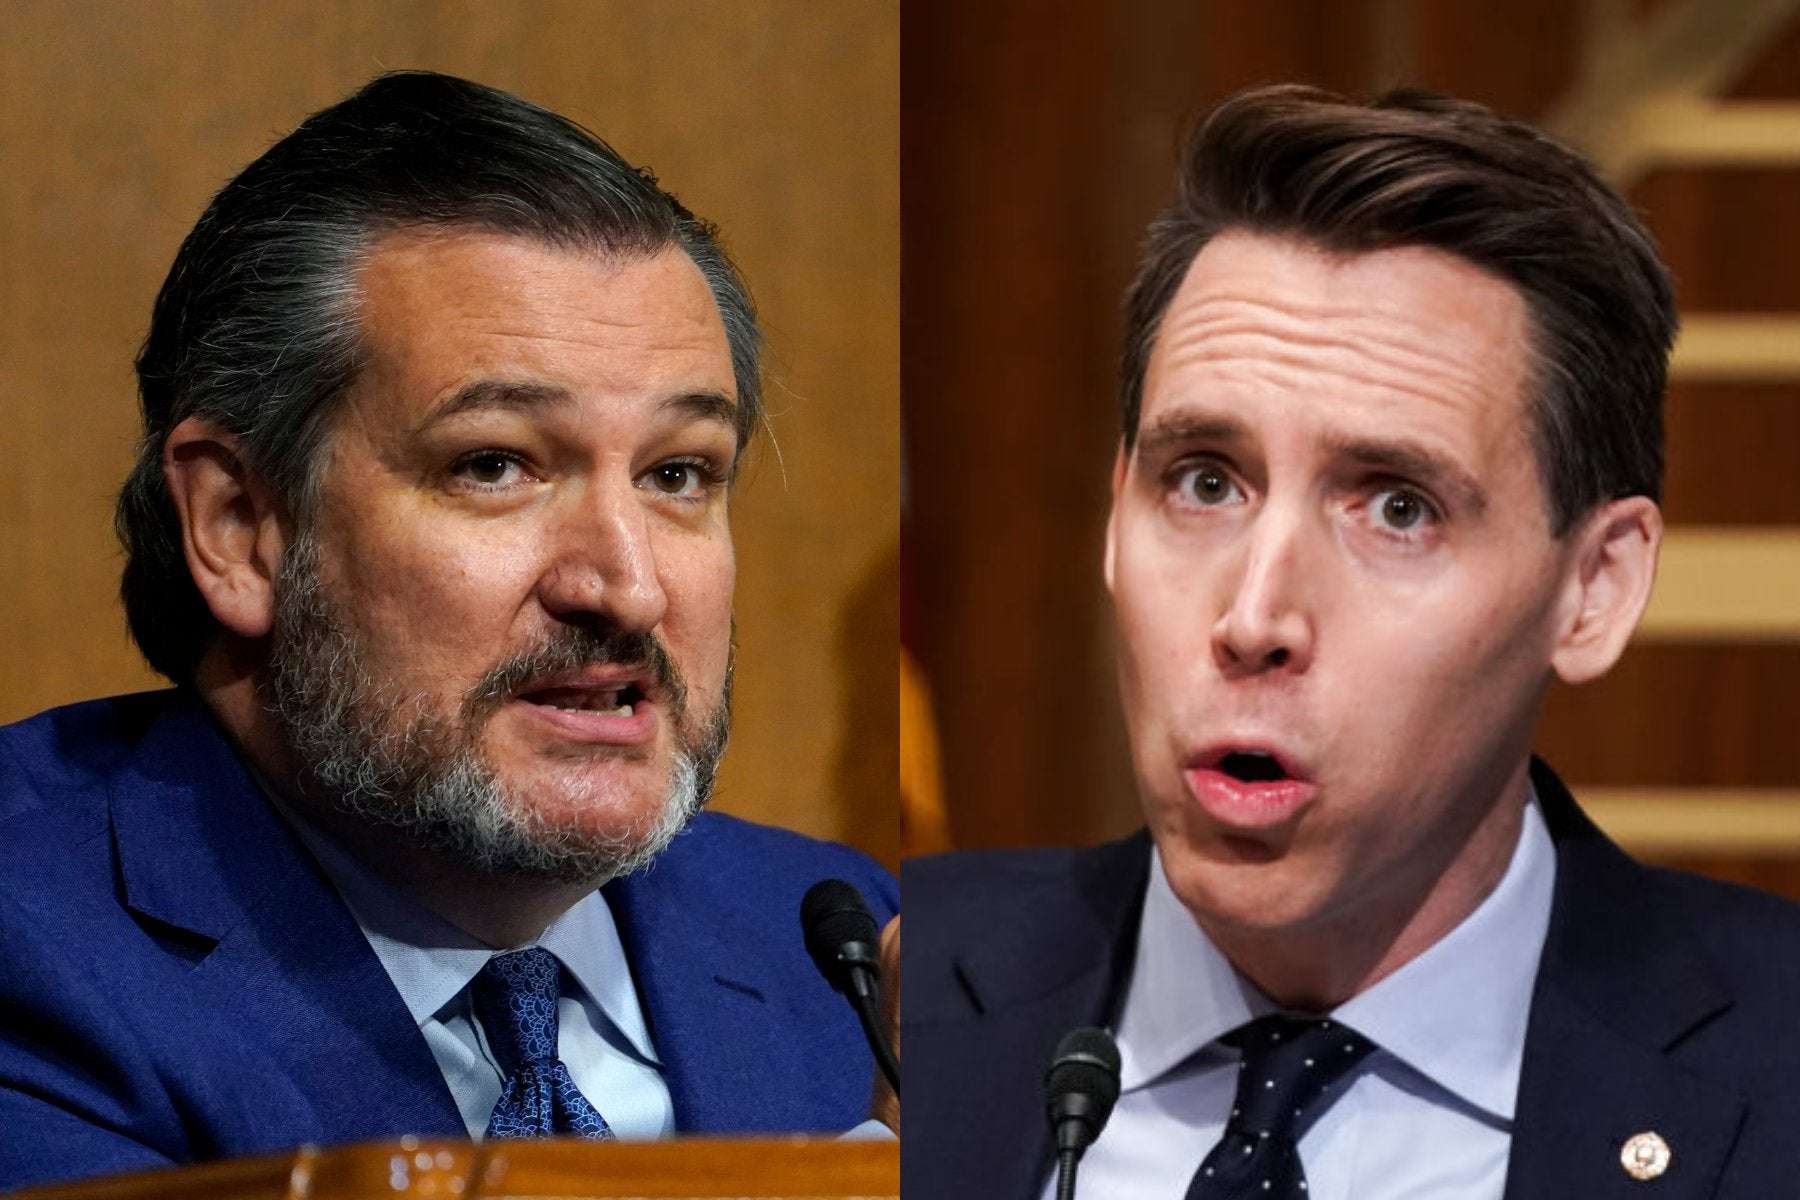 image for Video Urging Josh Hawley and Ted Cruz Expulsion Viewed 2 Million Times